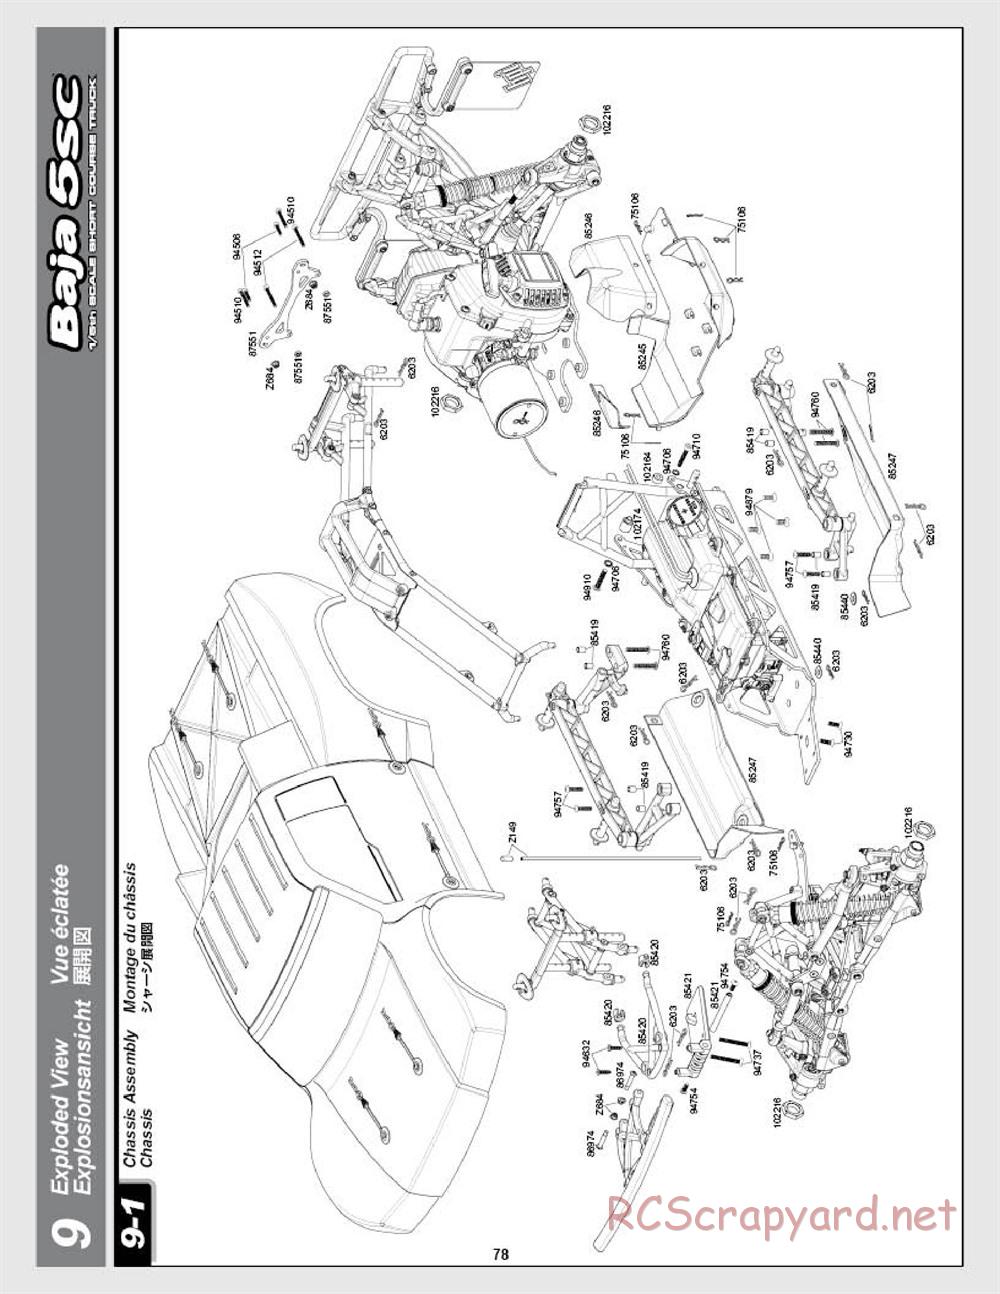 HPI - Baja 5SC - Exploded View - Page 78